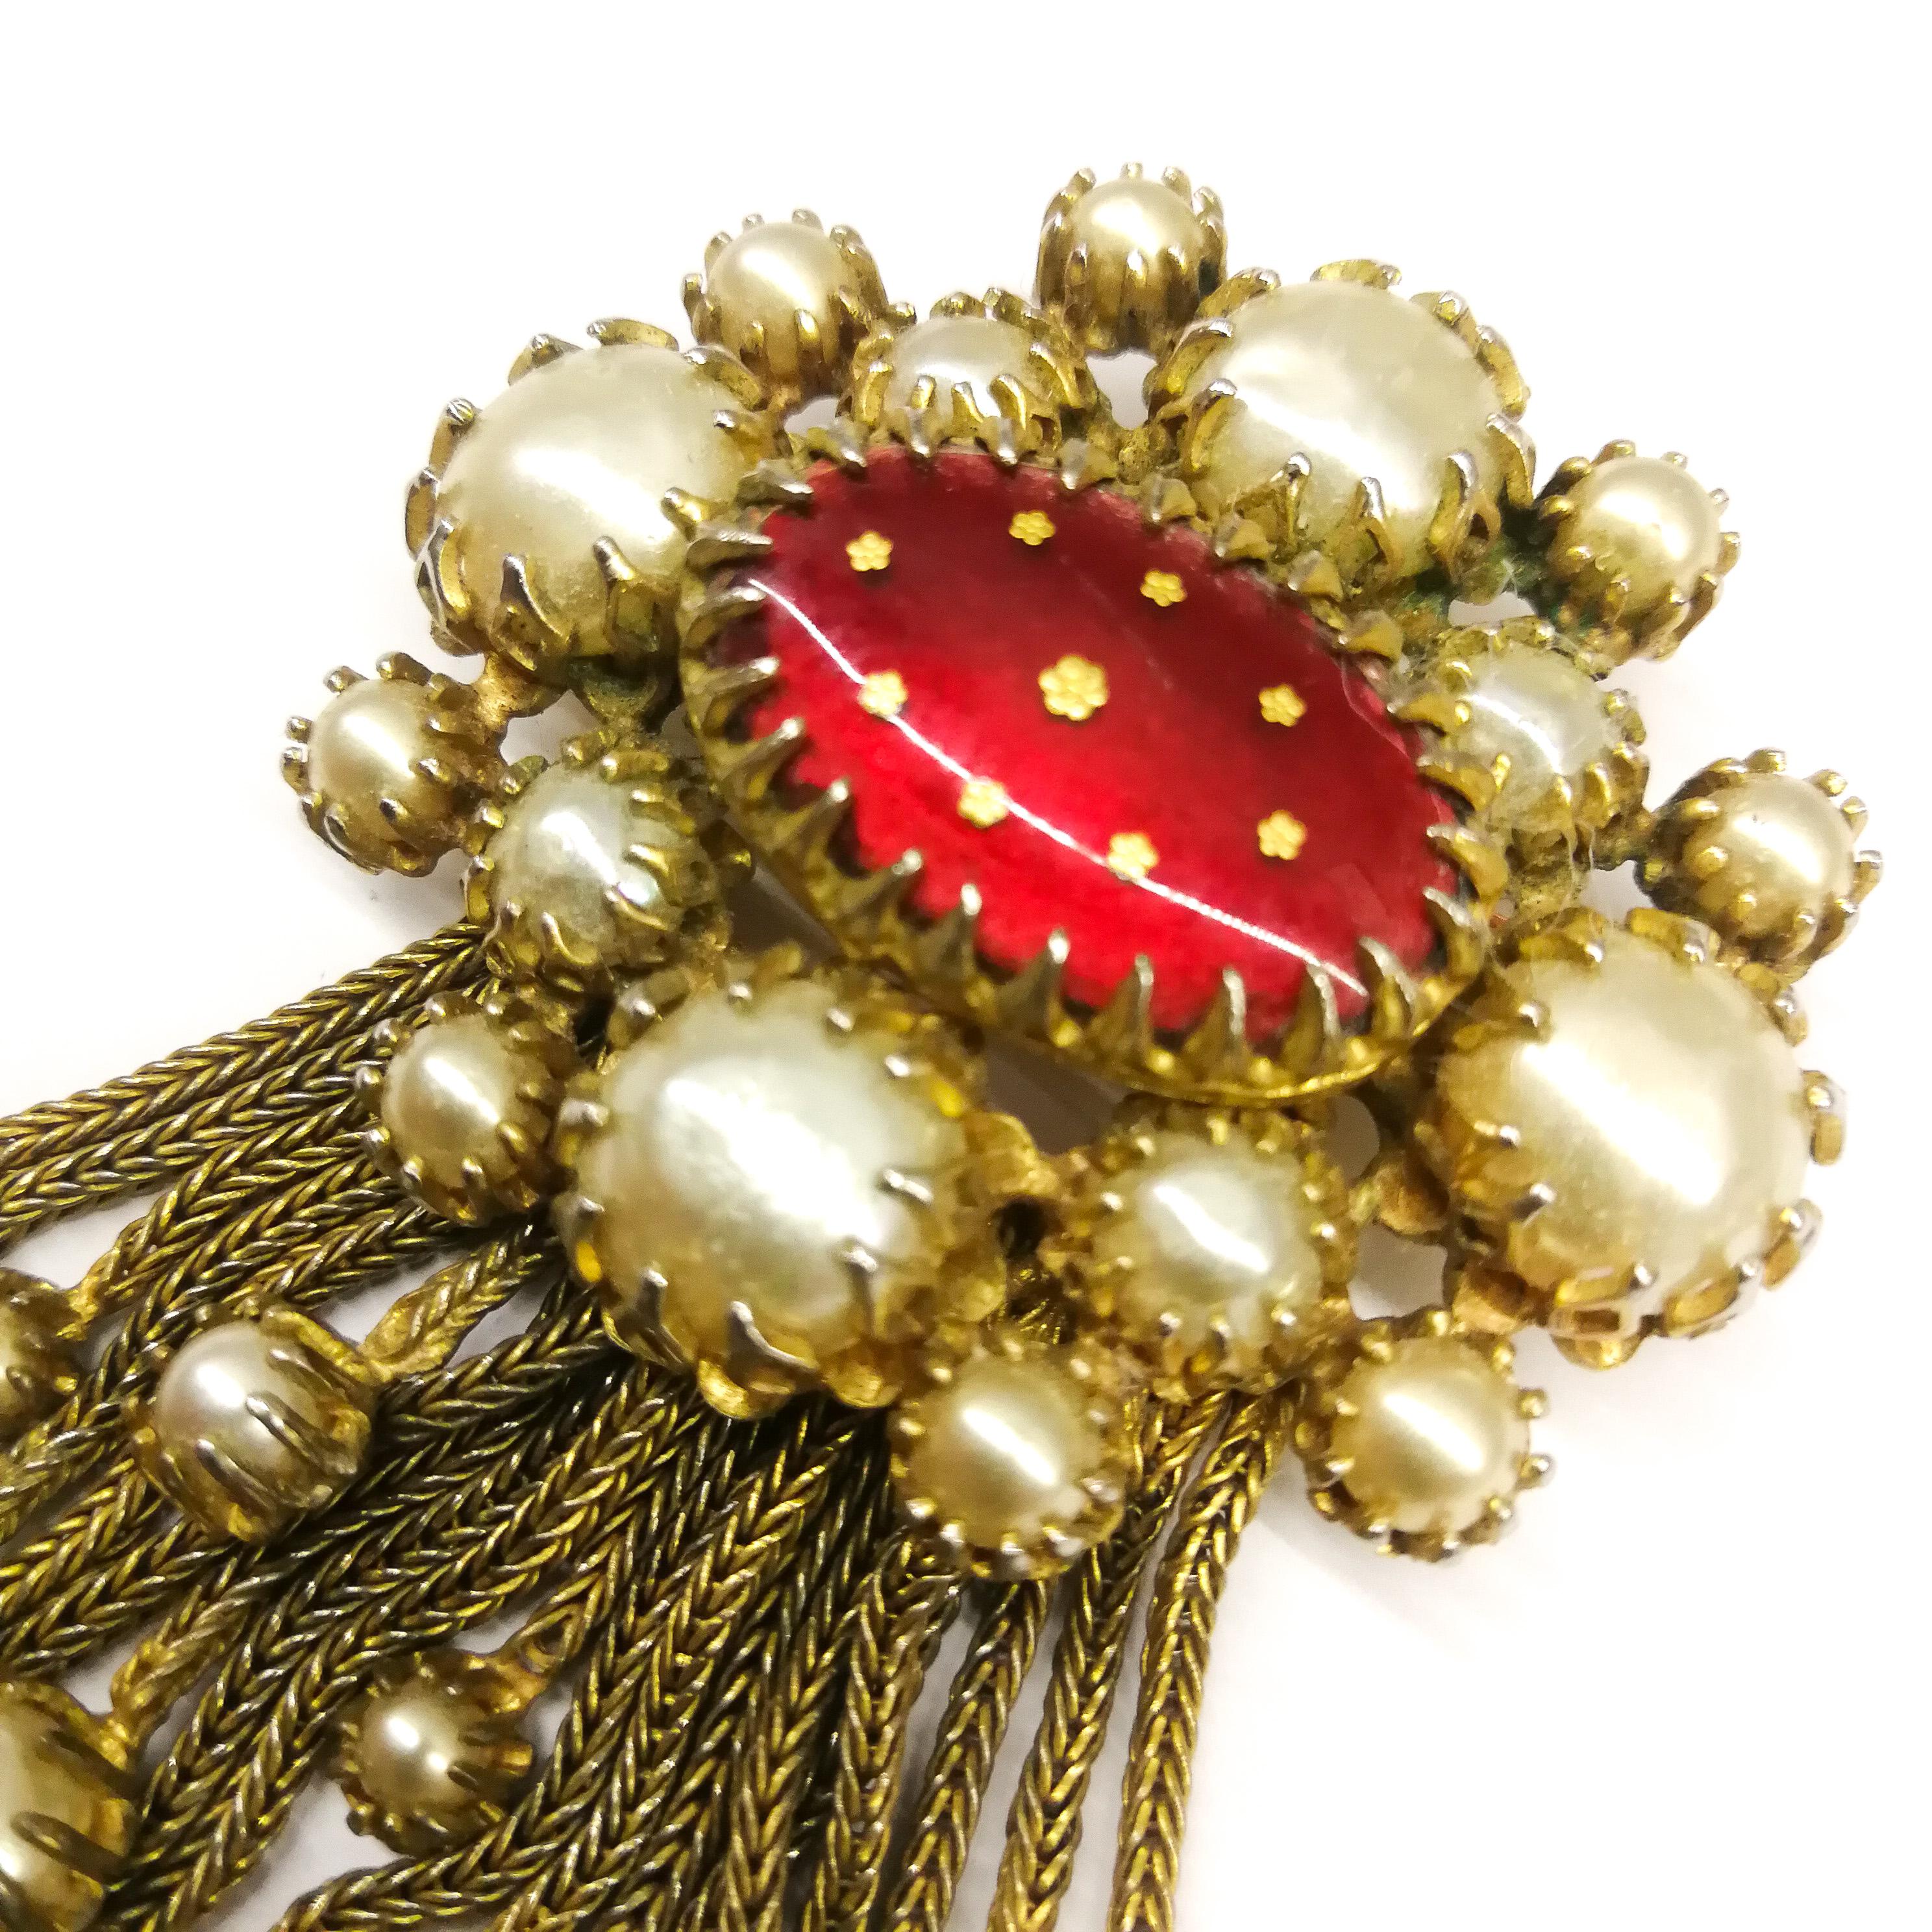 A rare and well known design by Mitchel Maer for Christian Dior, this brooch is a fine example of the Byzantine influence on the designers at this time. Made of softly gilded metal and baroque cabuchon paste pearls, a plaque of red and gilt Limoges